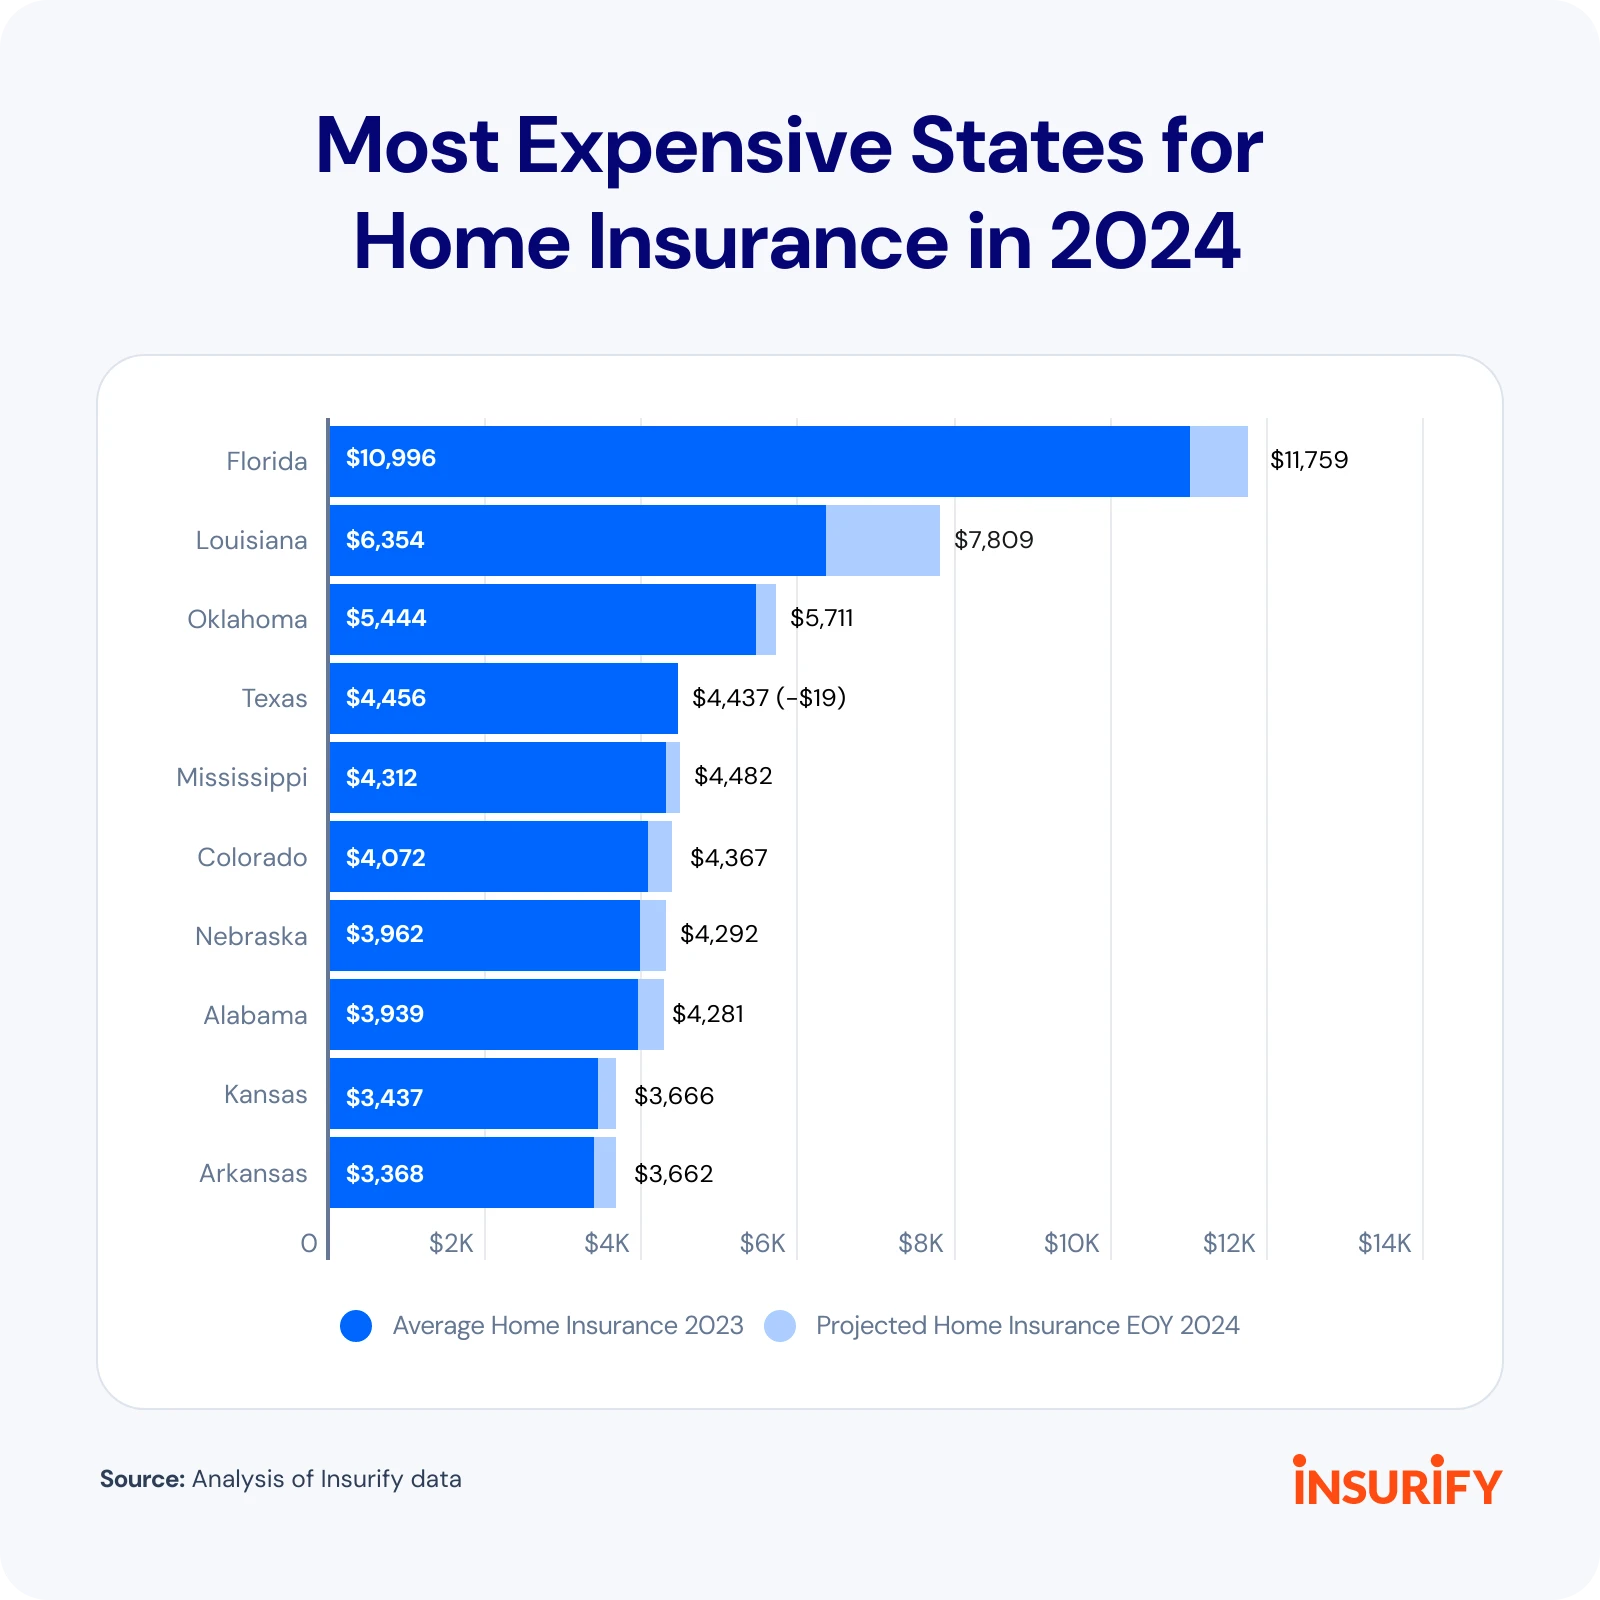 Most Expensive States for Home Insurance in 2024